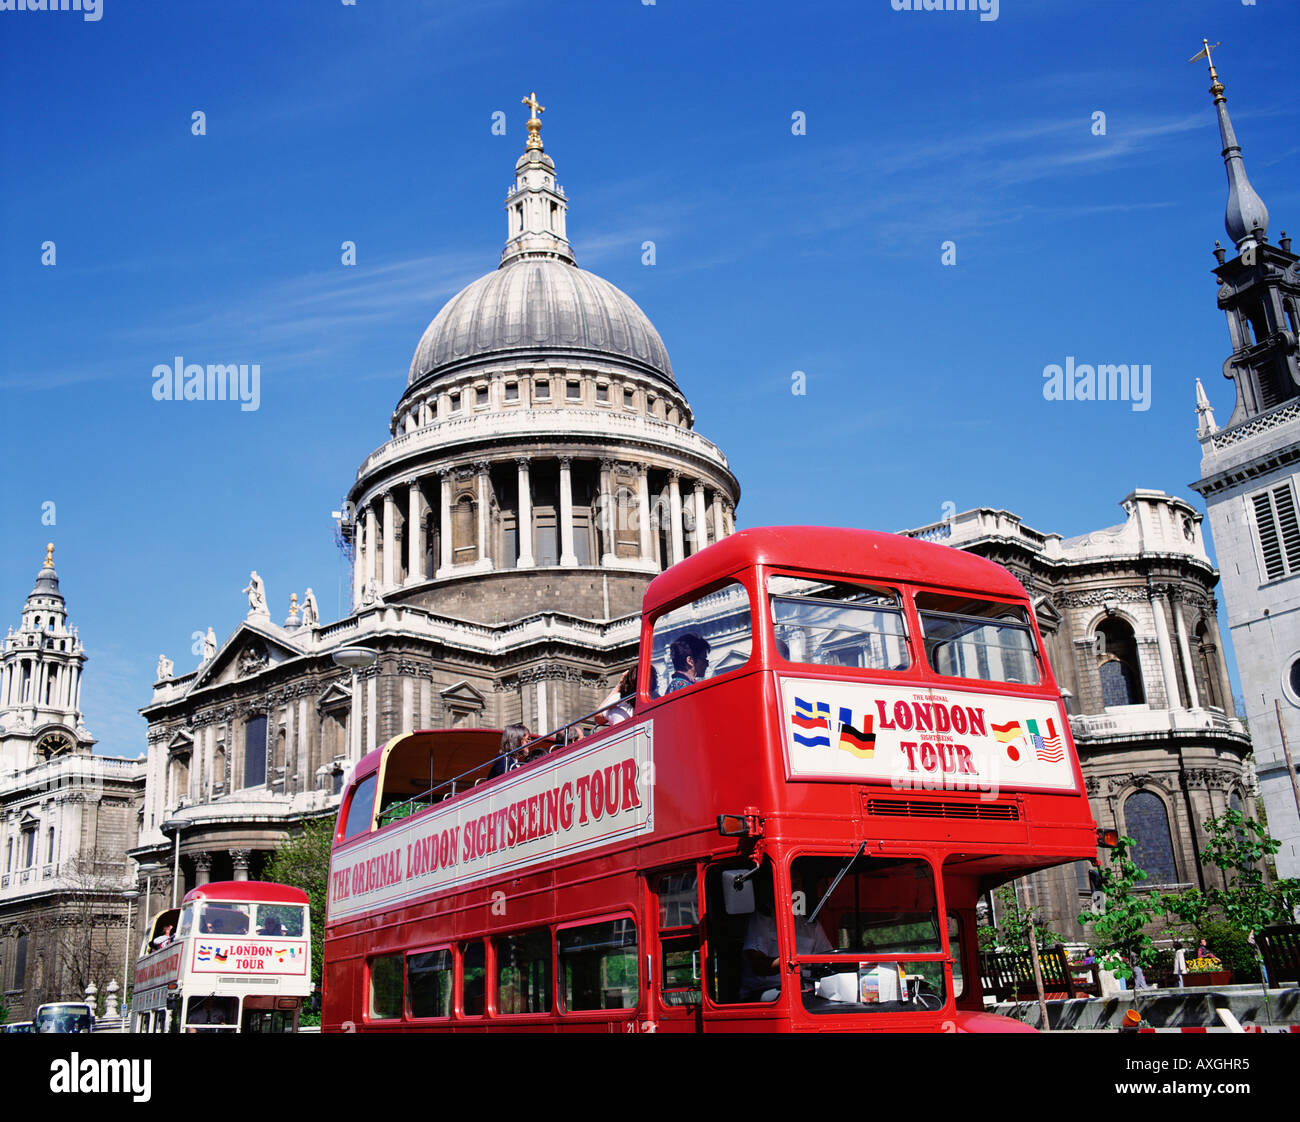 Red London sightseeing open top tour bus at St Paul's Cathedral, London England, Great Britain GB UK.The Original London Sightseeing Tour Bus. Red bus Stock Photo